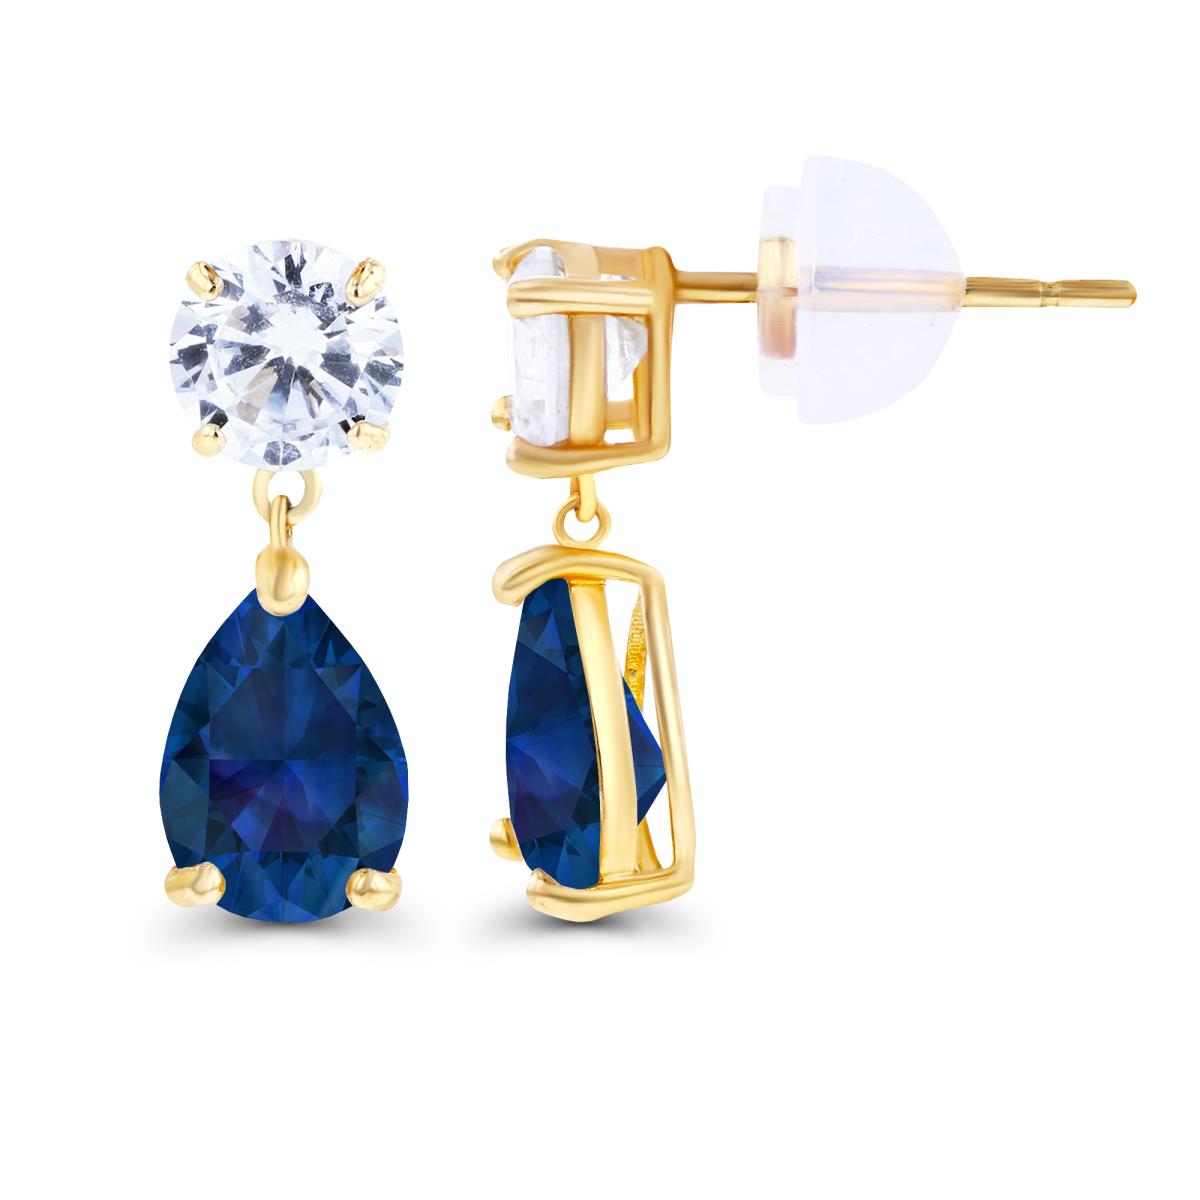 14K Yellow Gold 6x4mm Pear Created Blue Sapphire & 4.5mm Round Created White Sapphire Earrings with Silicon Backs